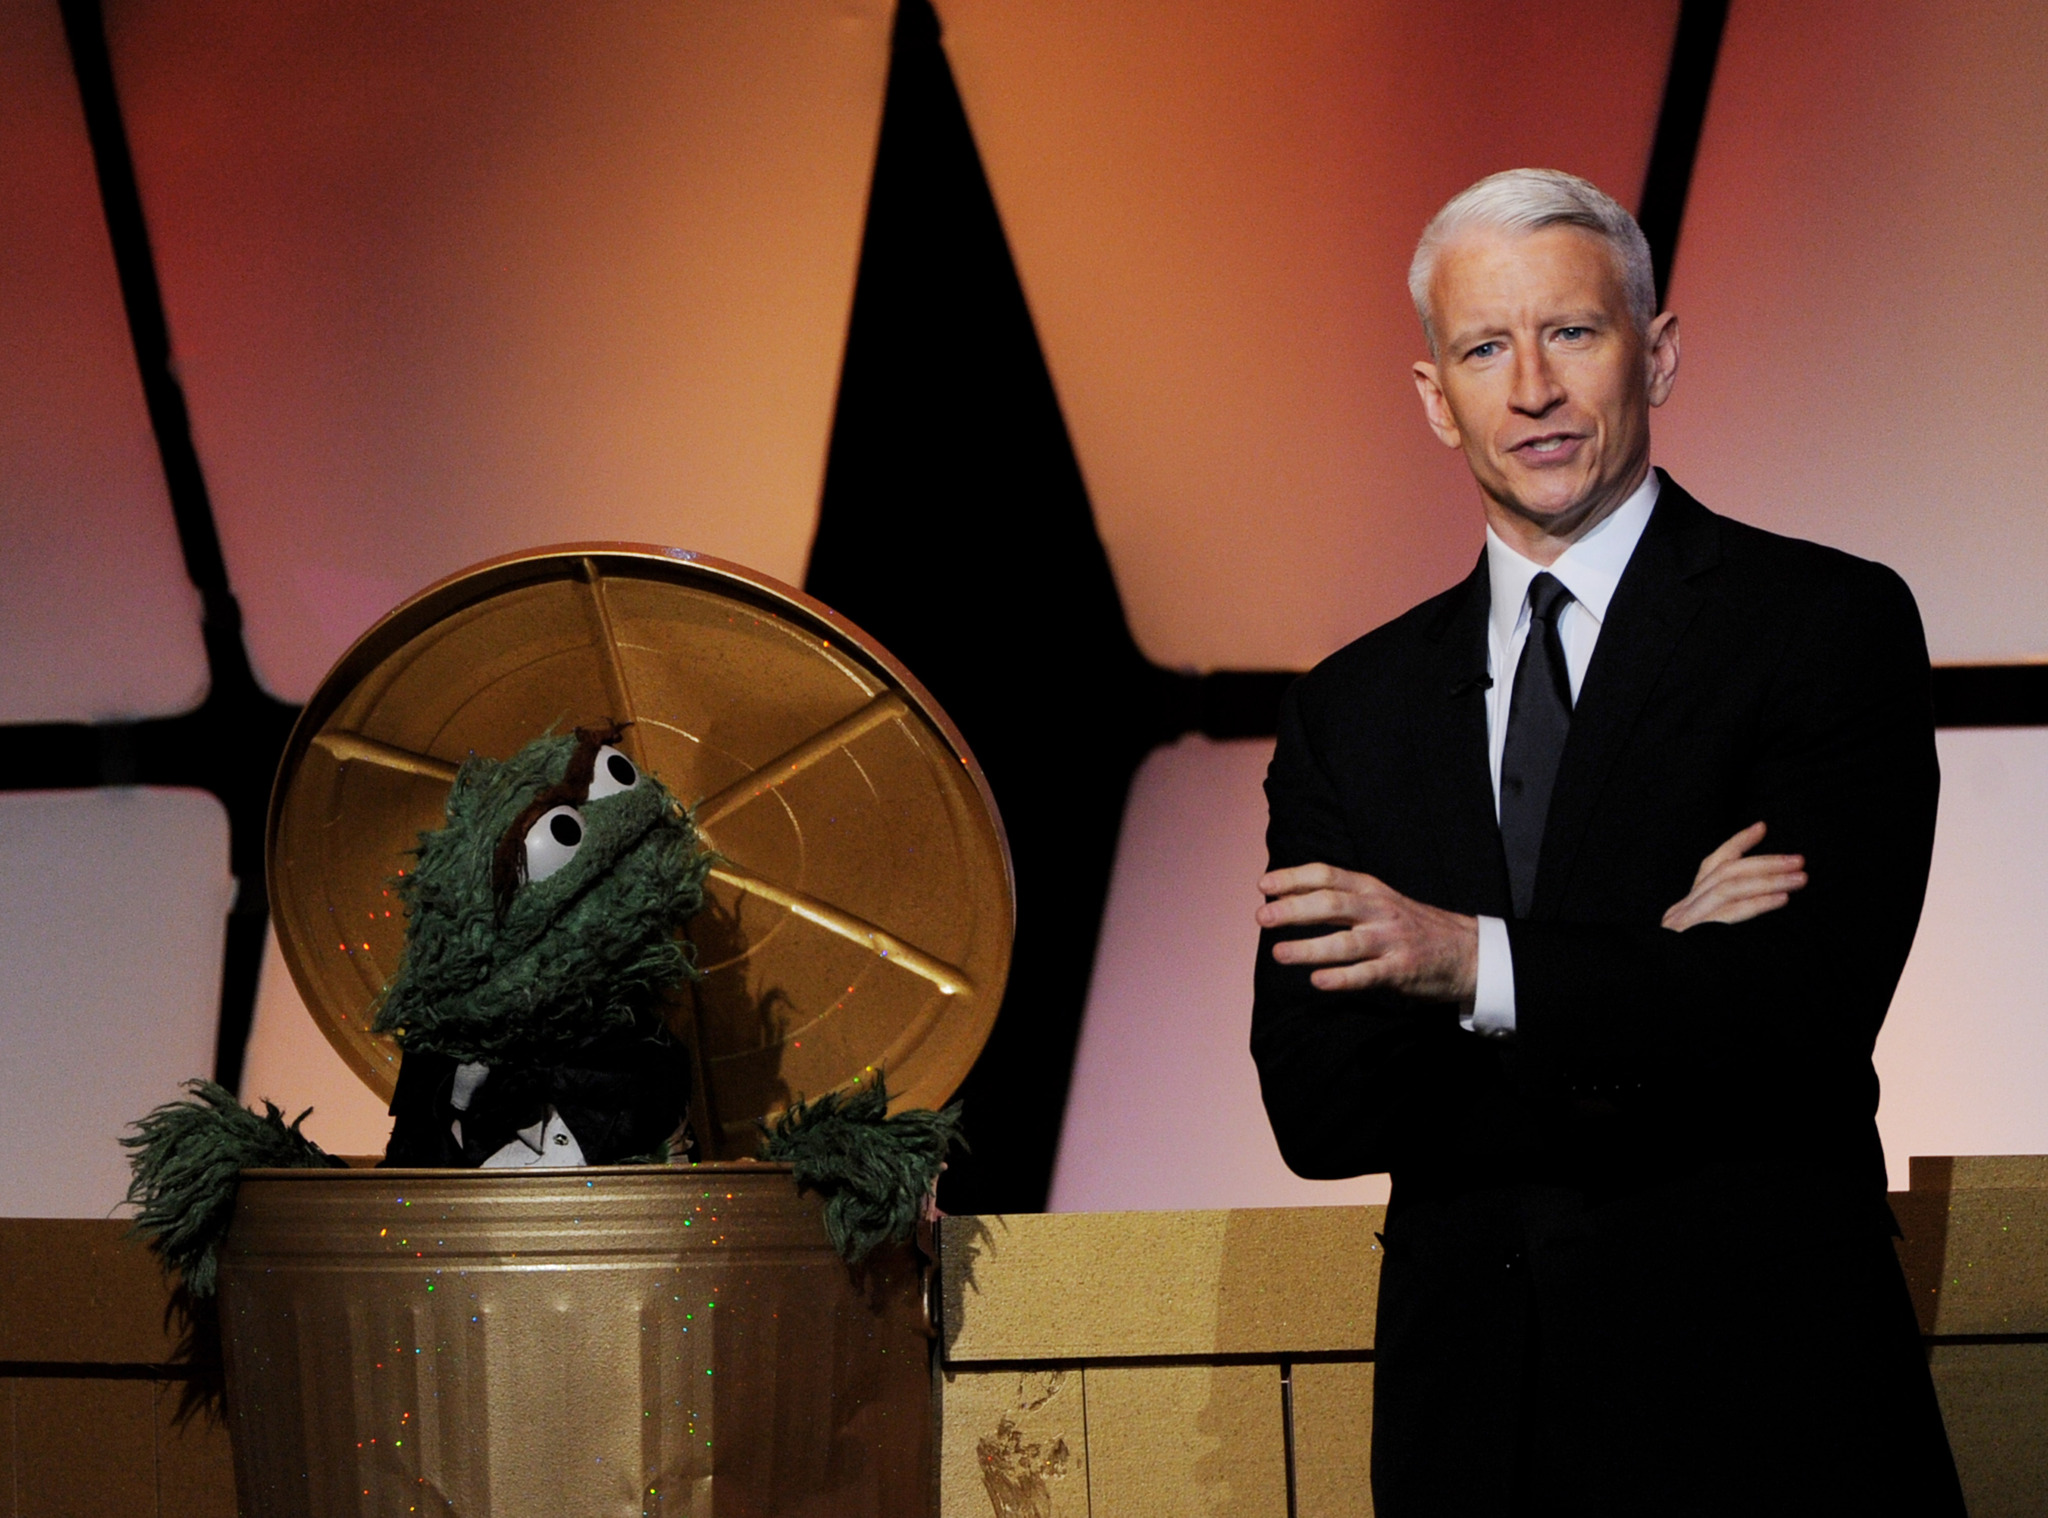 Oscar the Grouch and CNN anchor Anderson Cooper